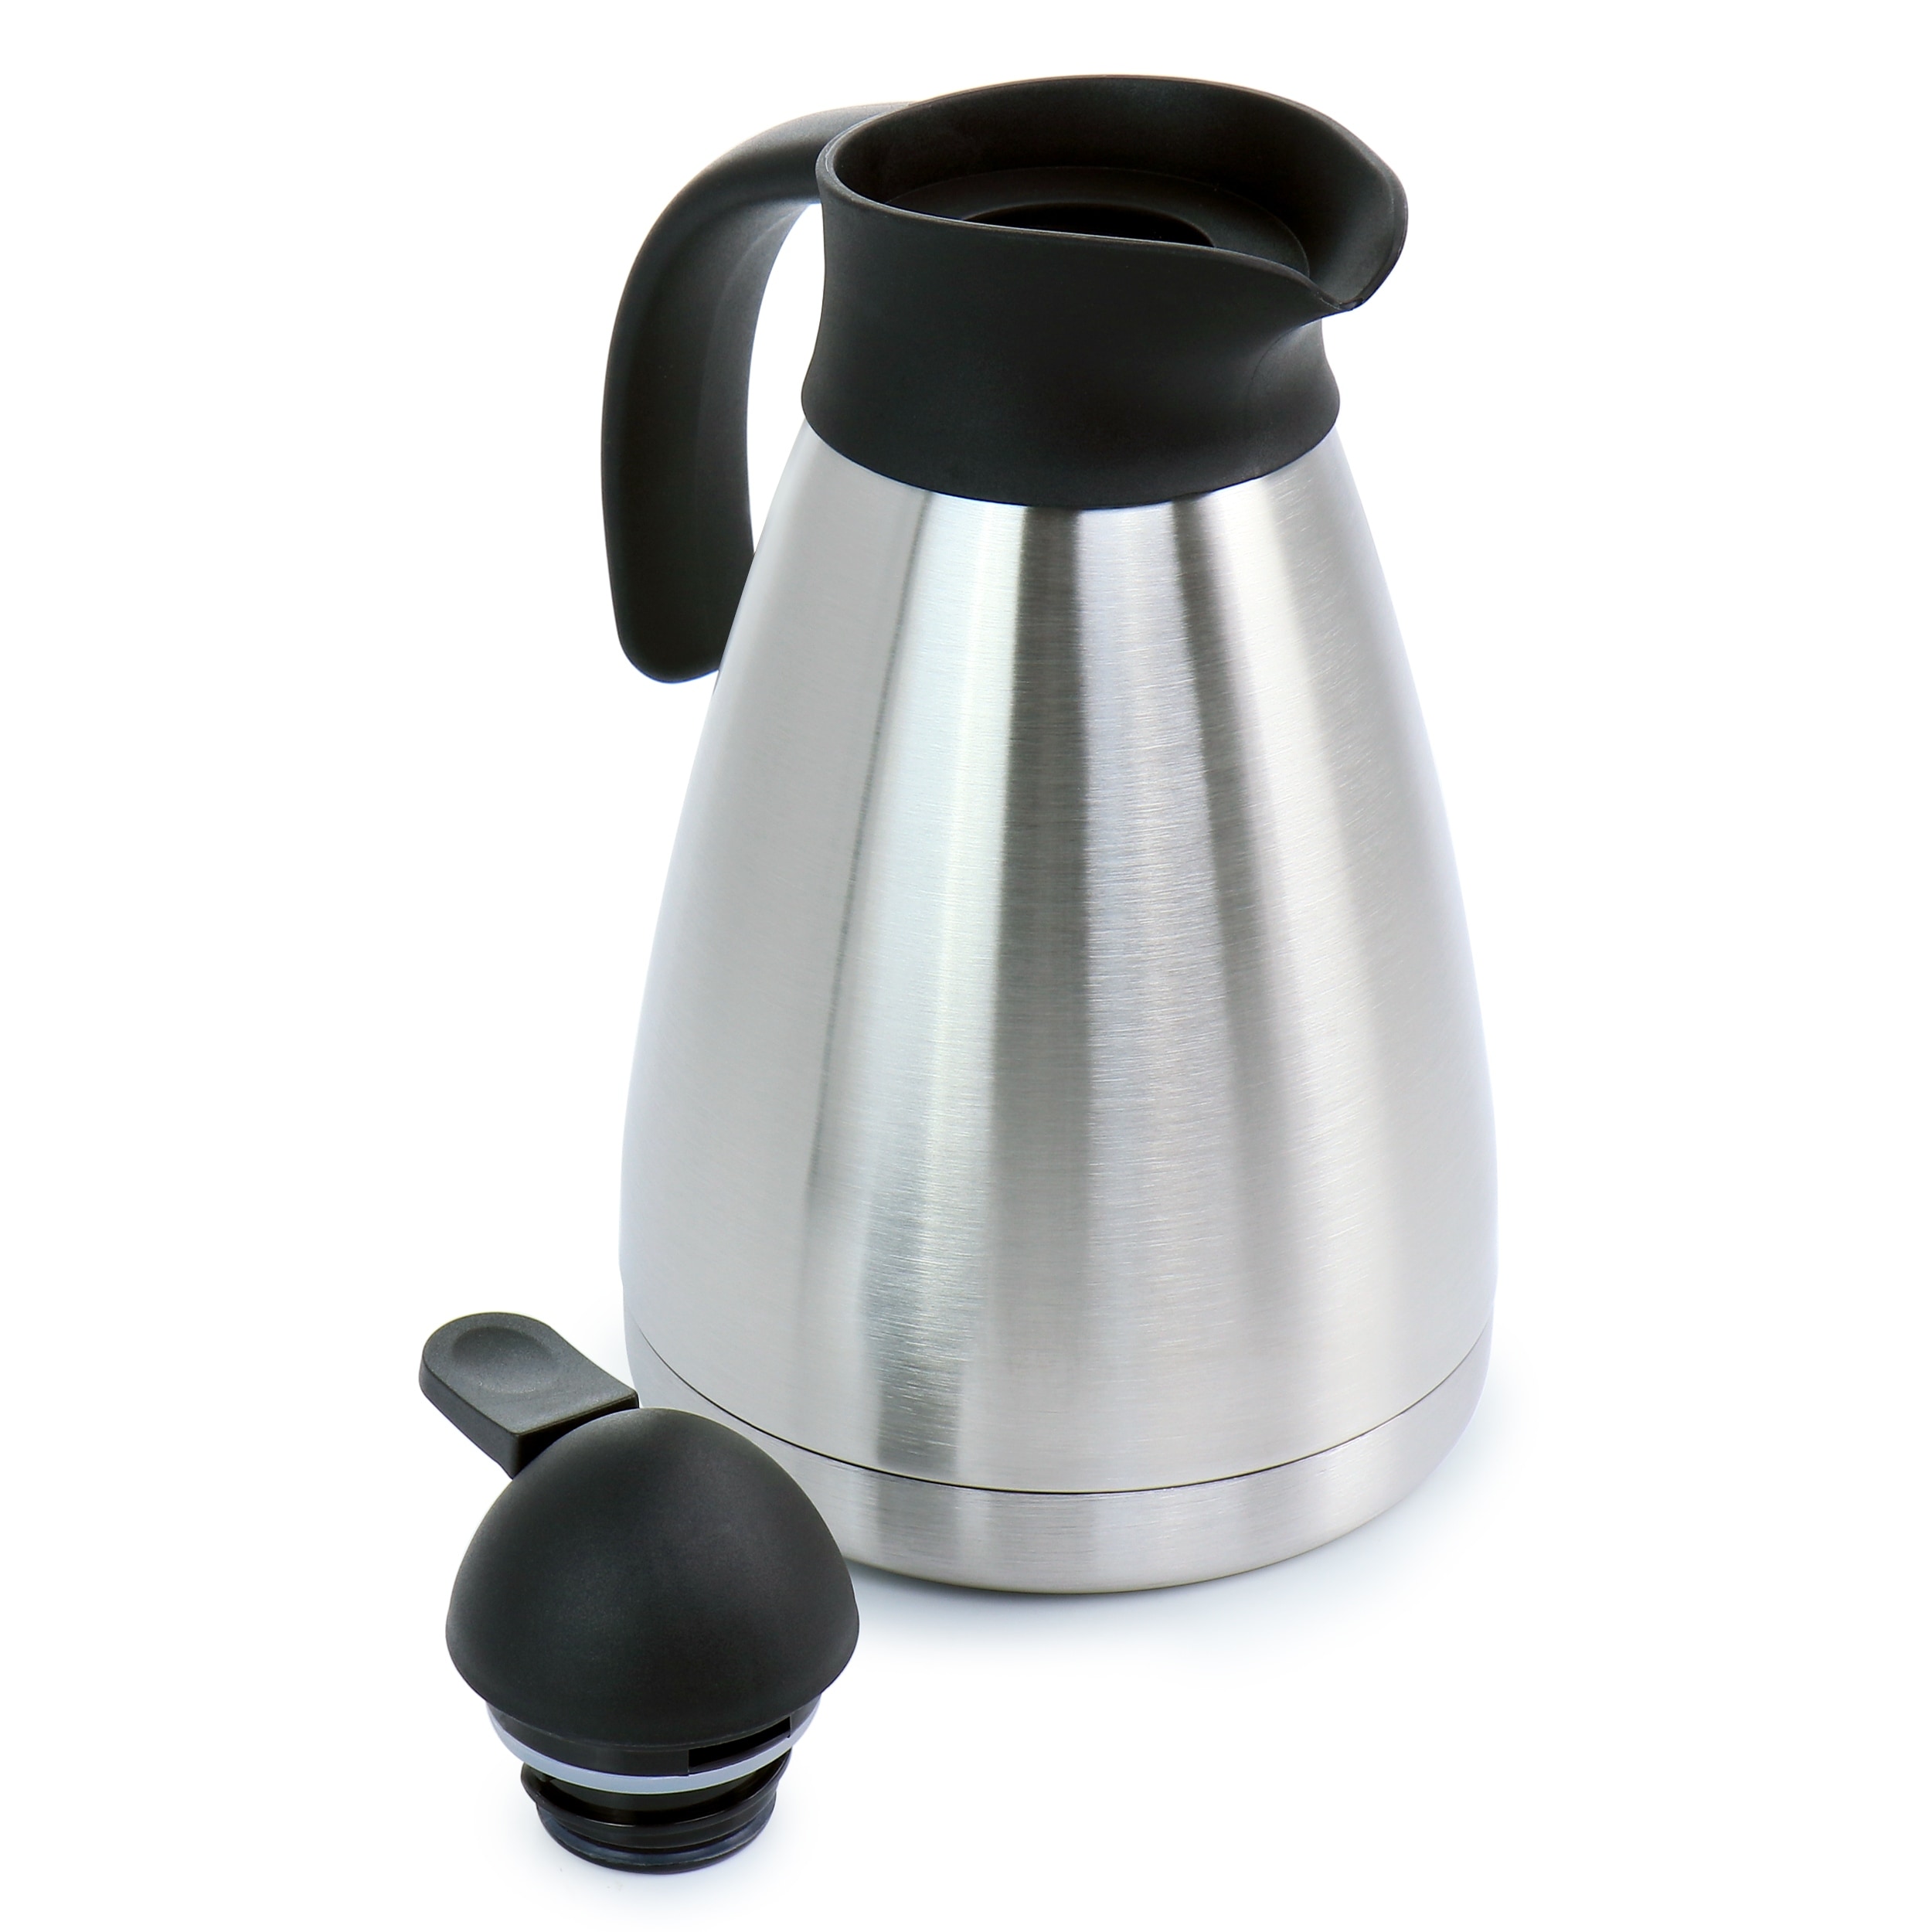 https://ak1.ostkcdn.com/images/products/is/images/direct/a3abb0360d0609e37b8e0b9bc9877868d94f4975/Mr.Coffee-1-Quart-Insulated-Stainless-Steel-Thermal-Coffee-Pot.jpg